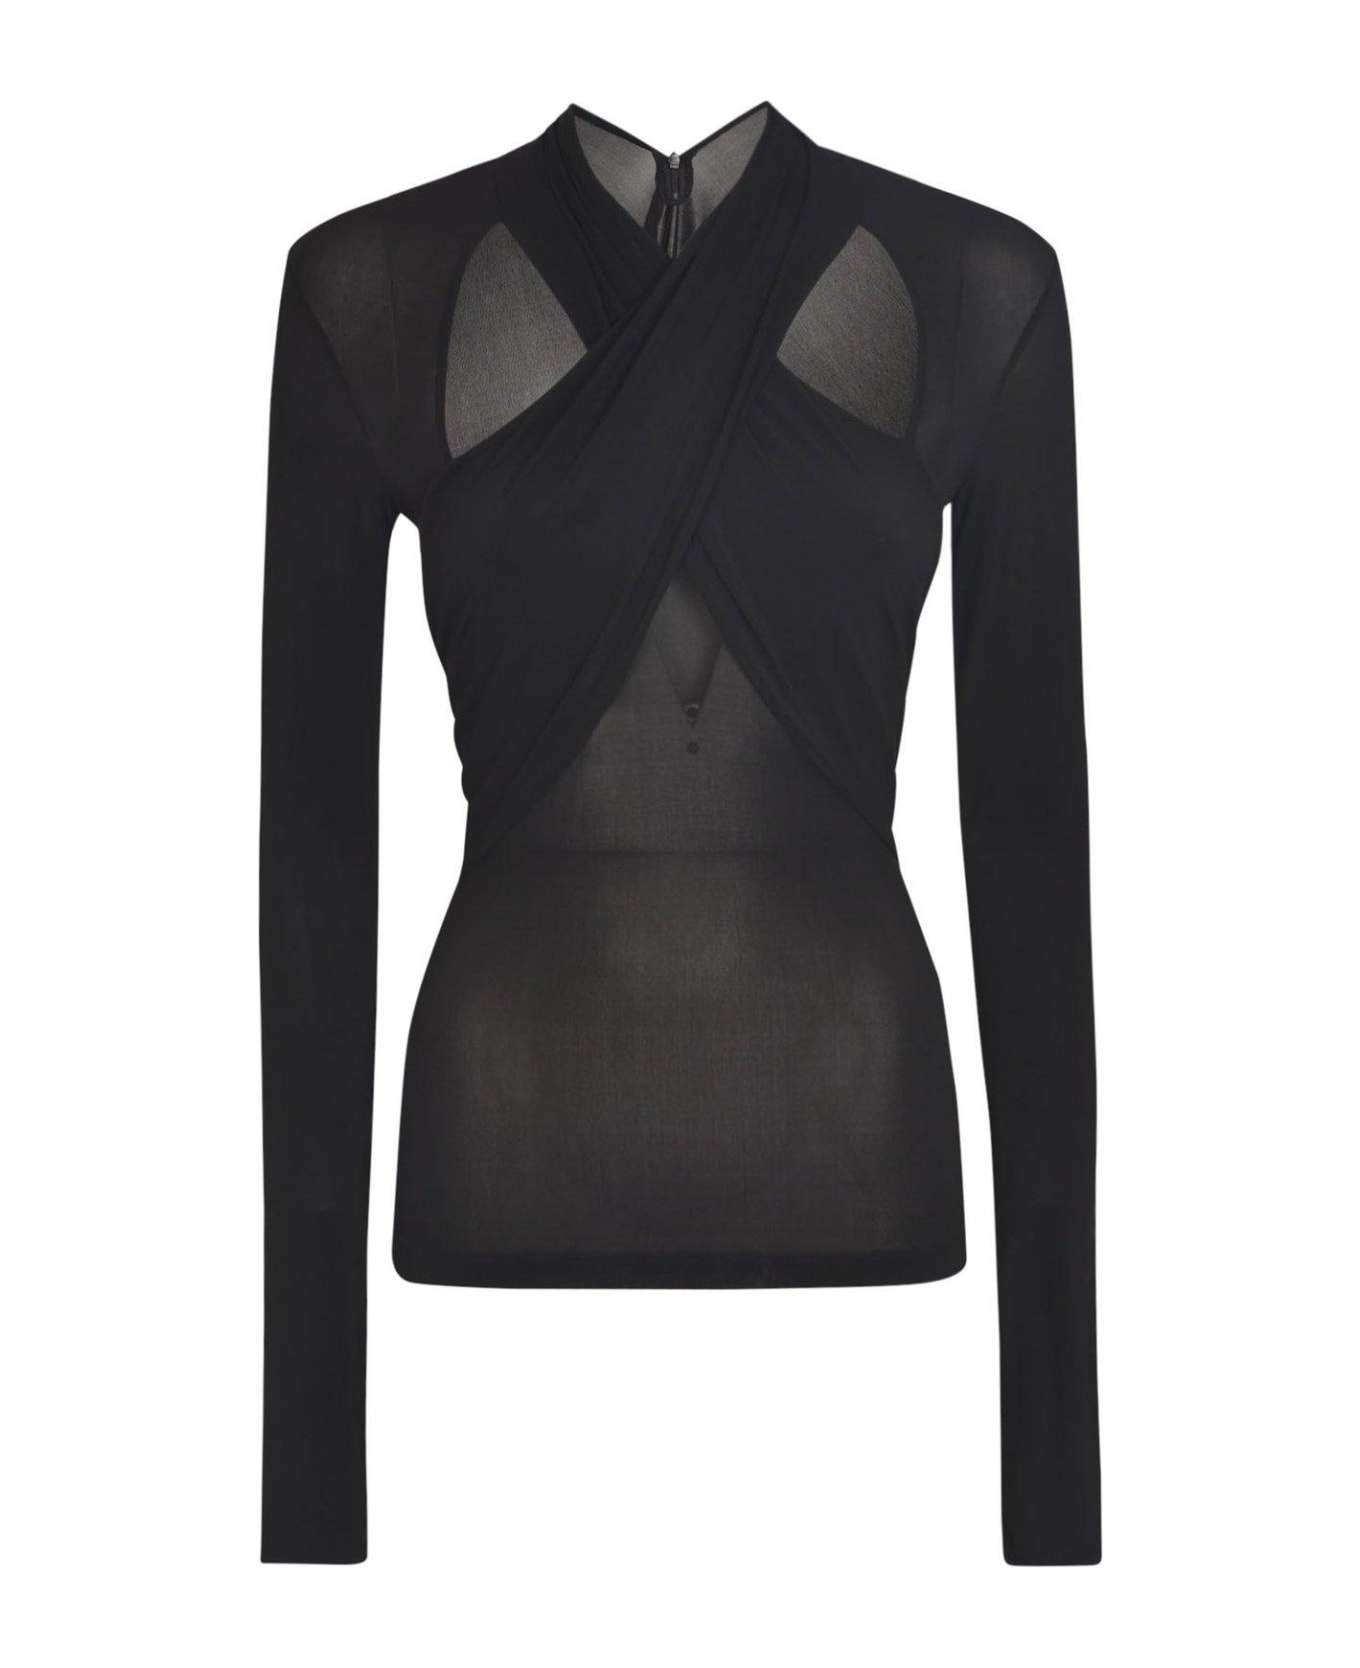 Isabel Marant Cut-out Detailed Crossover Neck Top - Black